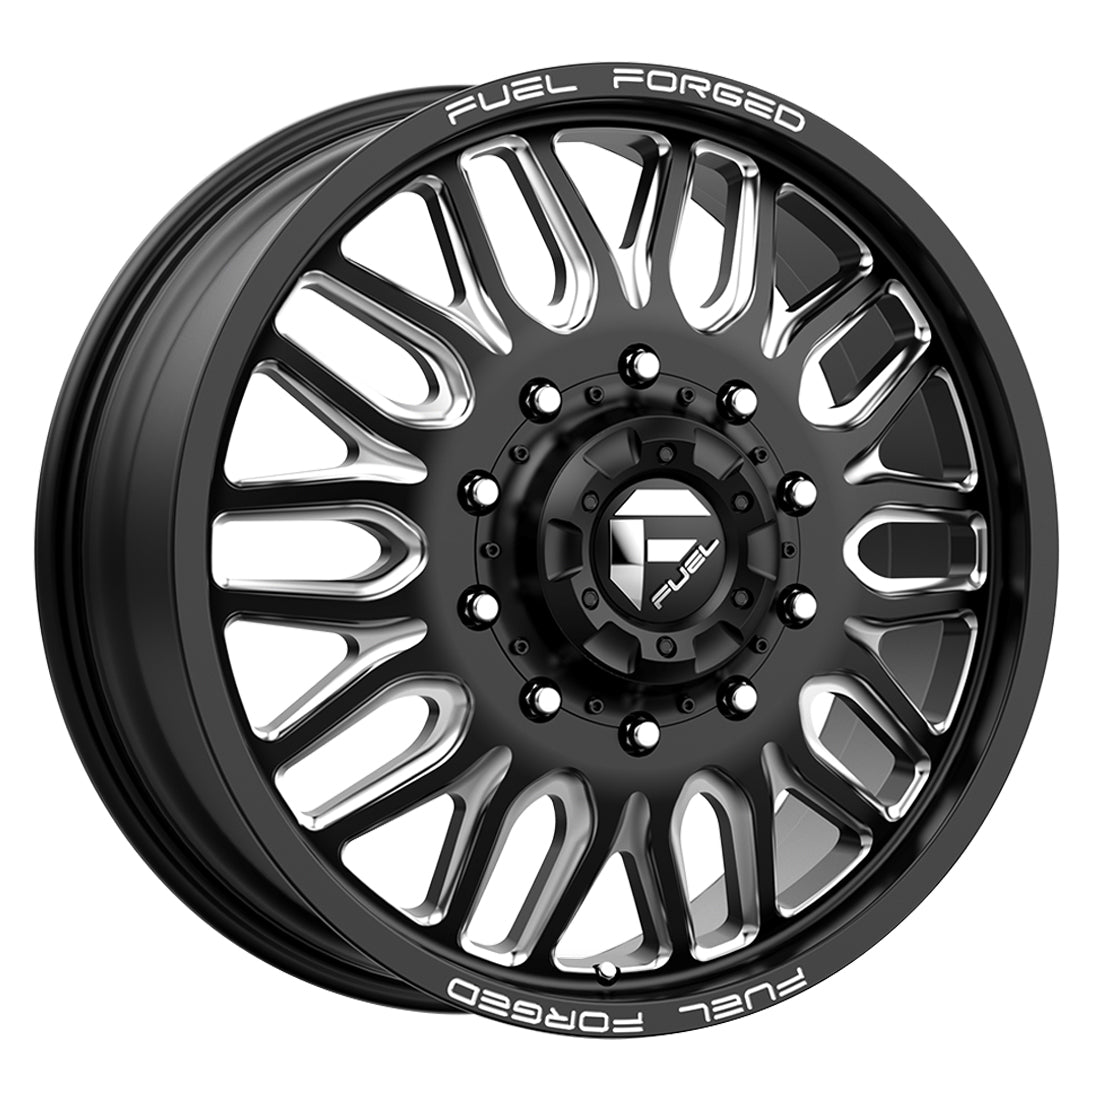 FF66D Matte Black Milled 10 Lug Open Country A/TIII 35x11.50R20 (34.5 x 11.4)